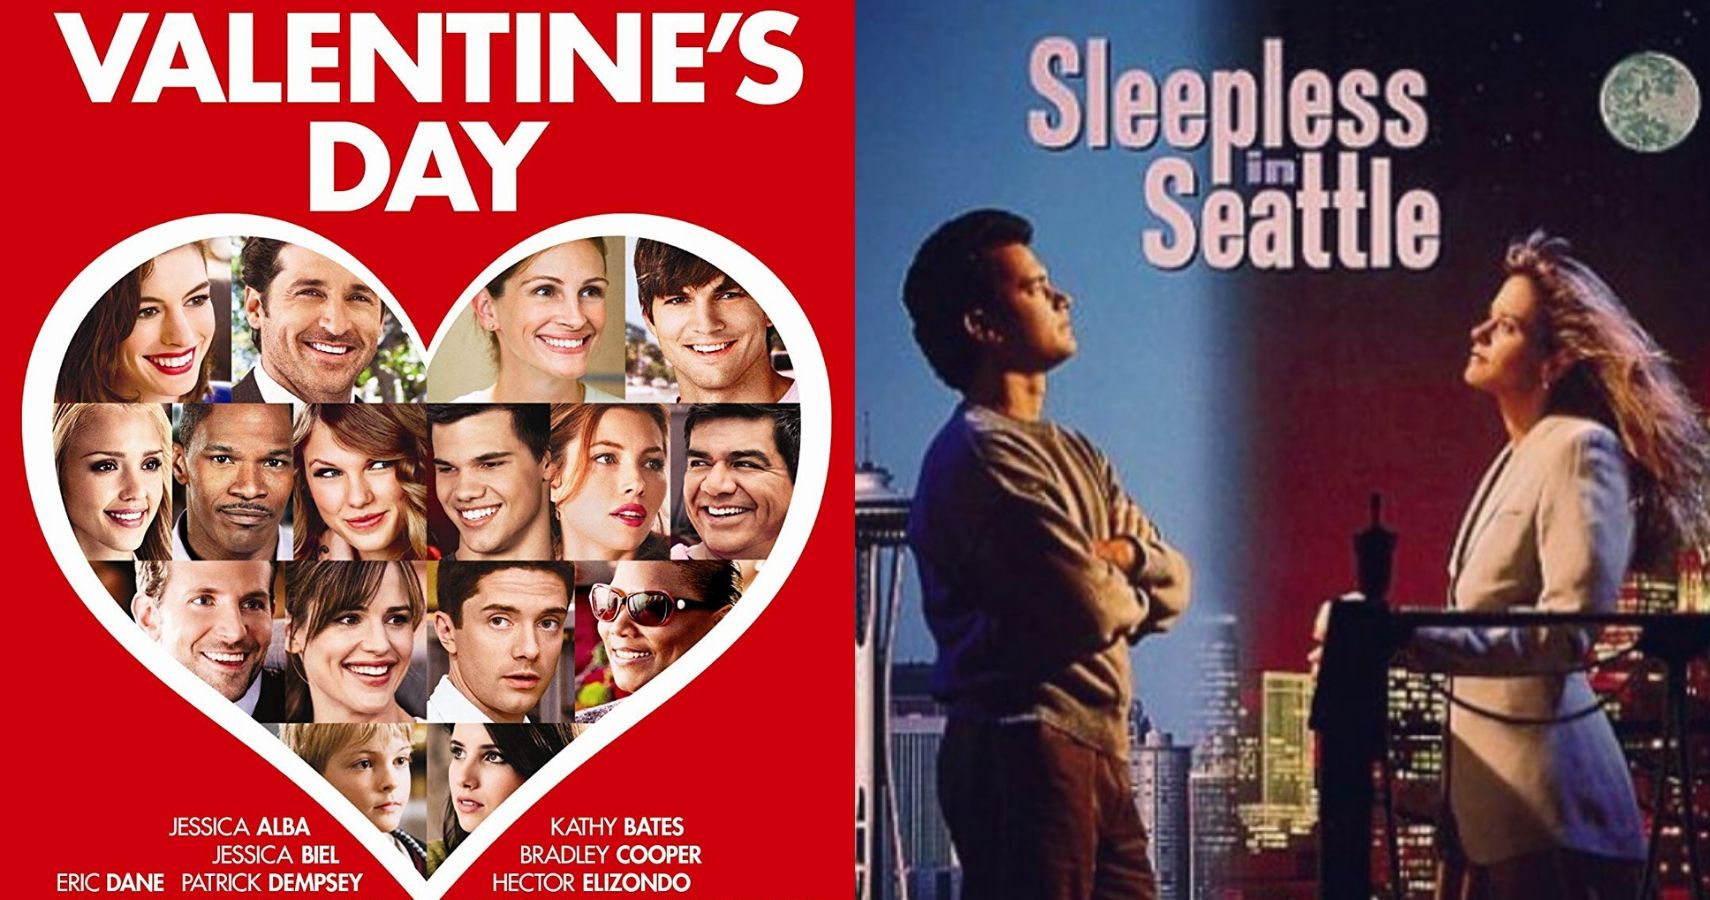 The 10 Best Valentines Day Movies Of All Time (According To Rotten Tomatoes)